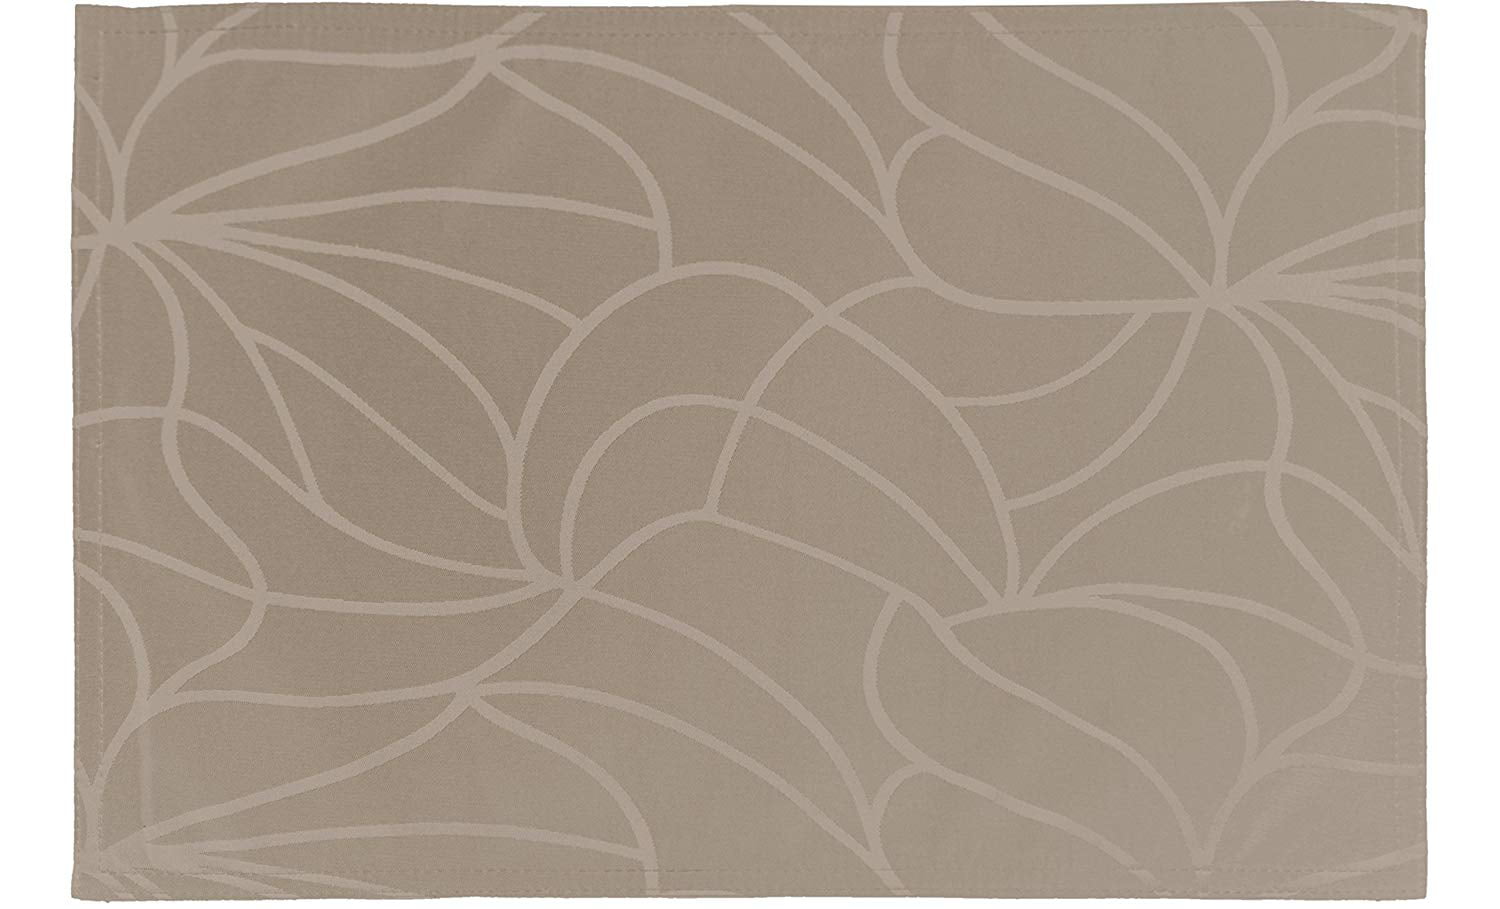 Cuisinart Easy Care Spill-Proof Fabric Placemat, 13-Inch by 19-Inch 